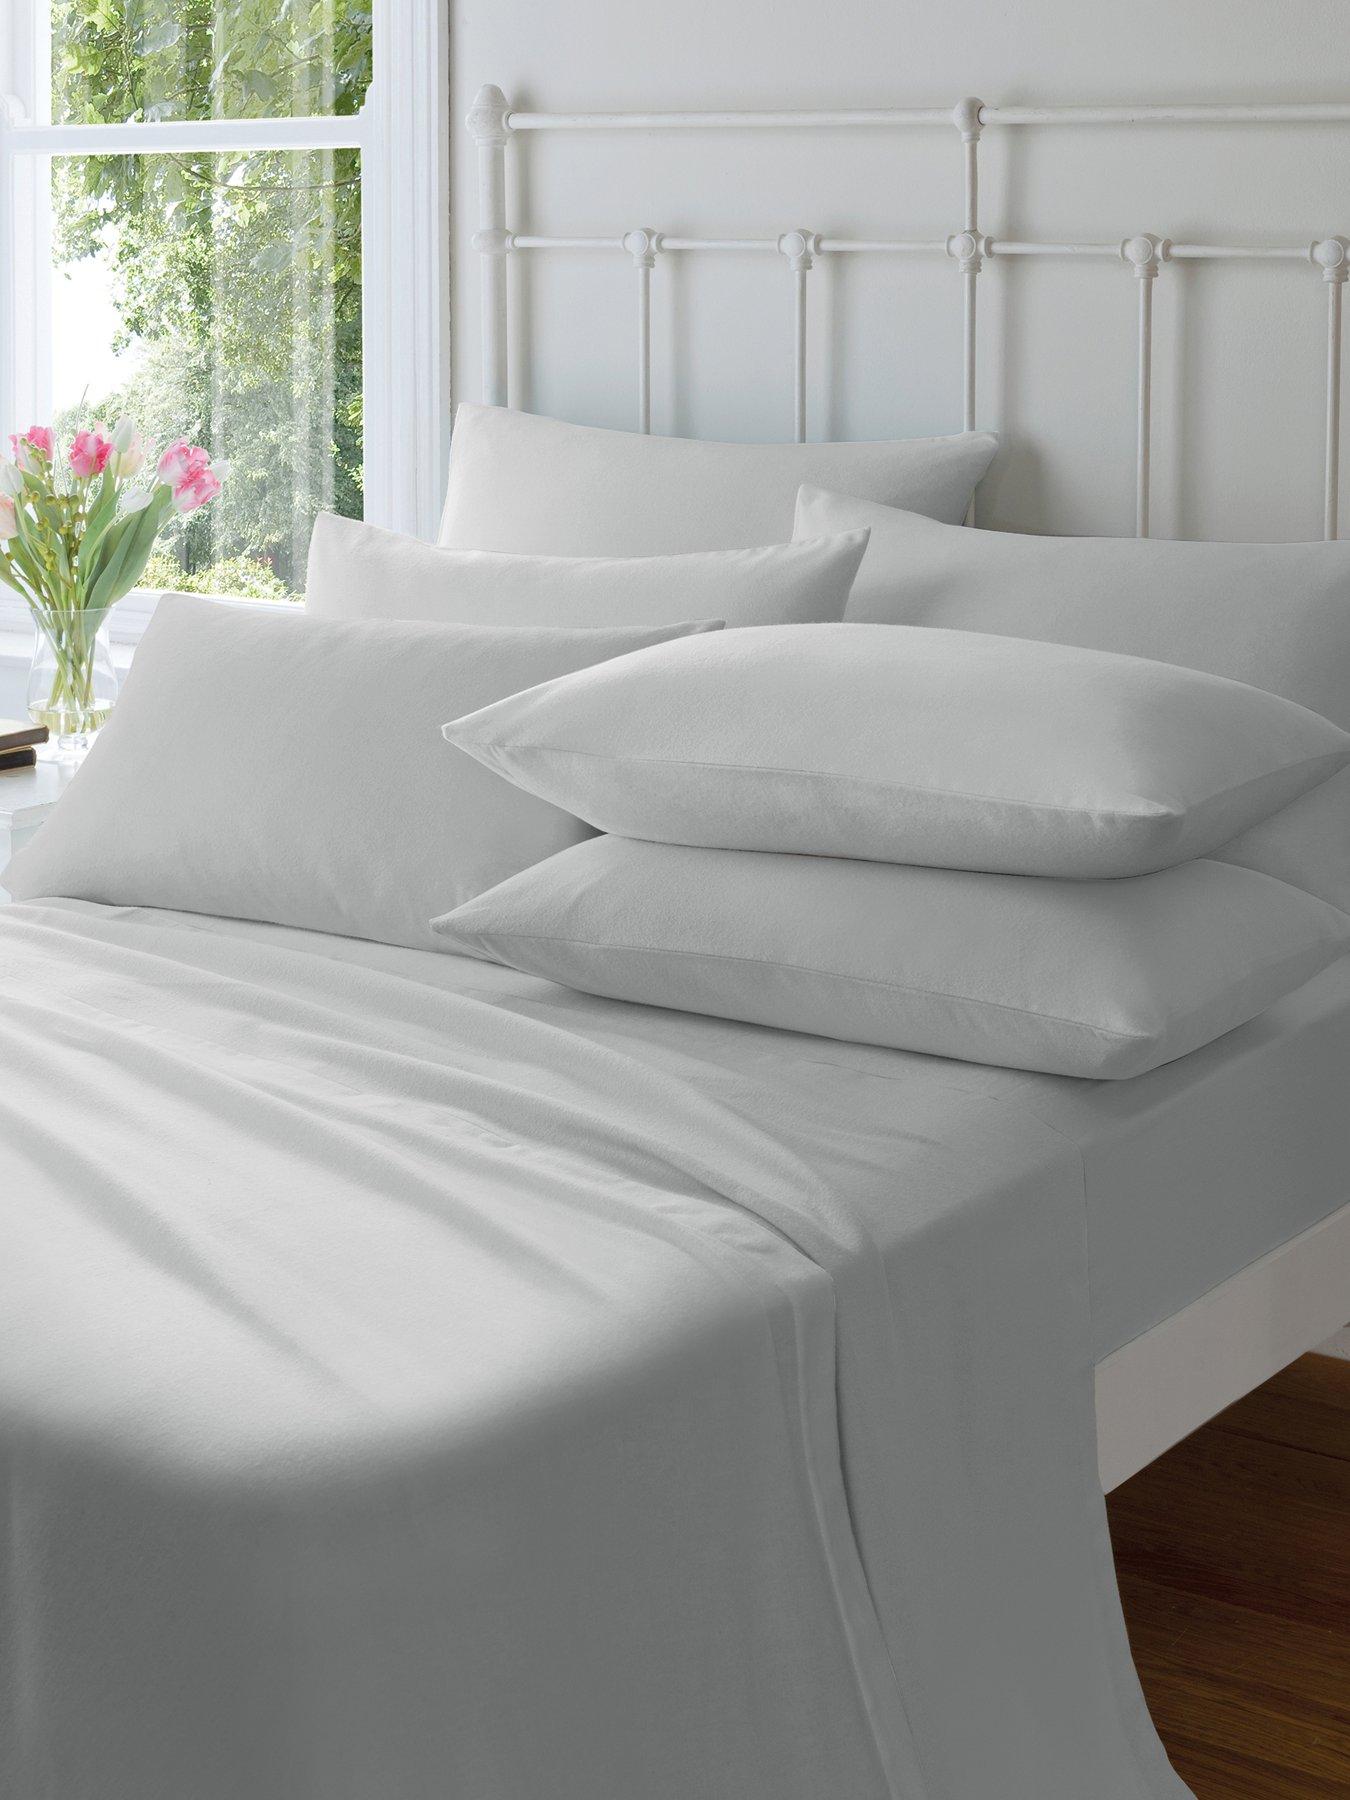 Details about   New Deep Flat Sheet Bed Sheets Poly Cotton Single Double King Super King Size 